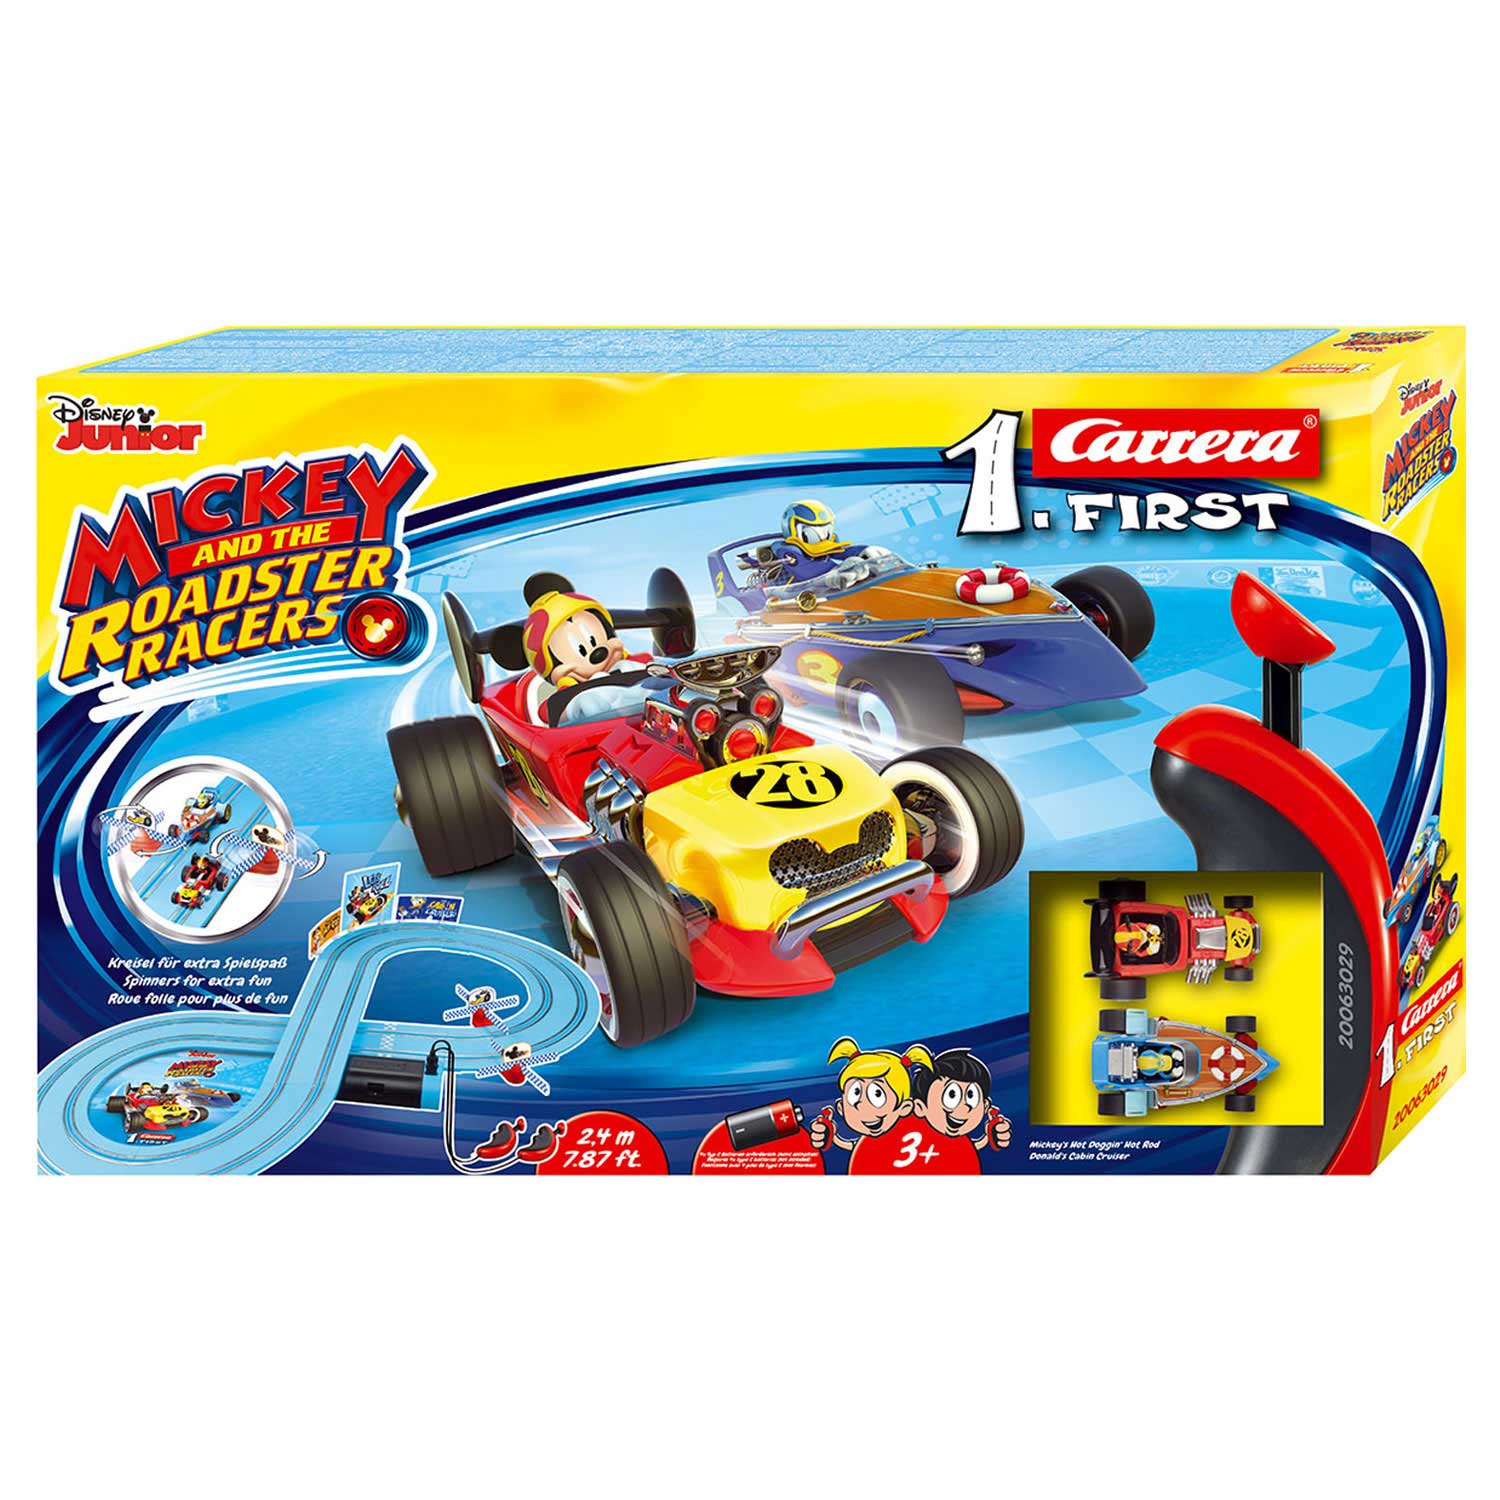 Carrera First Race Track - Mickey and the Roadster Racers | Thimble Toys